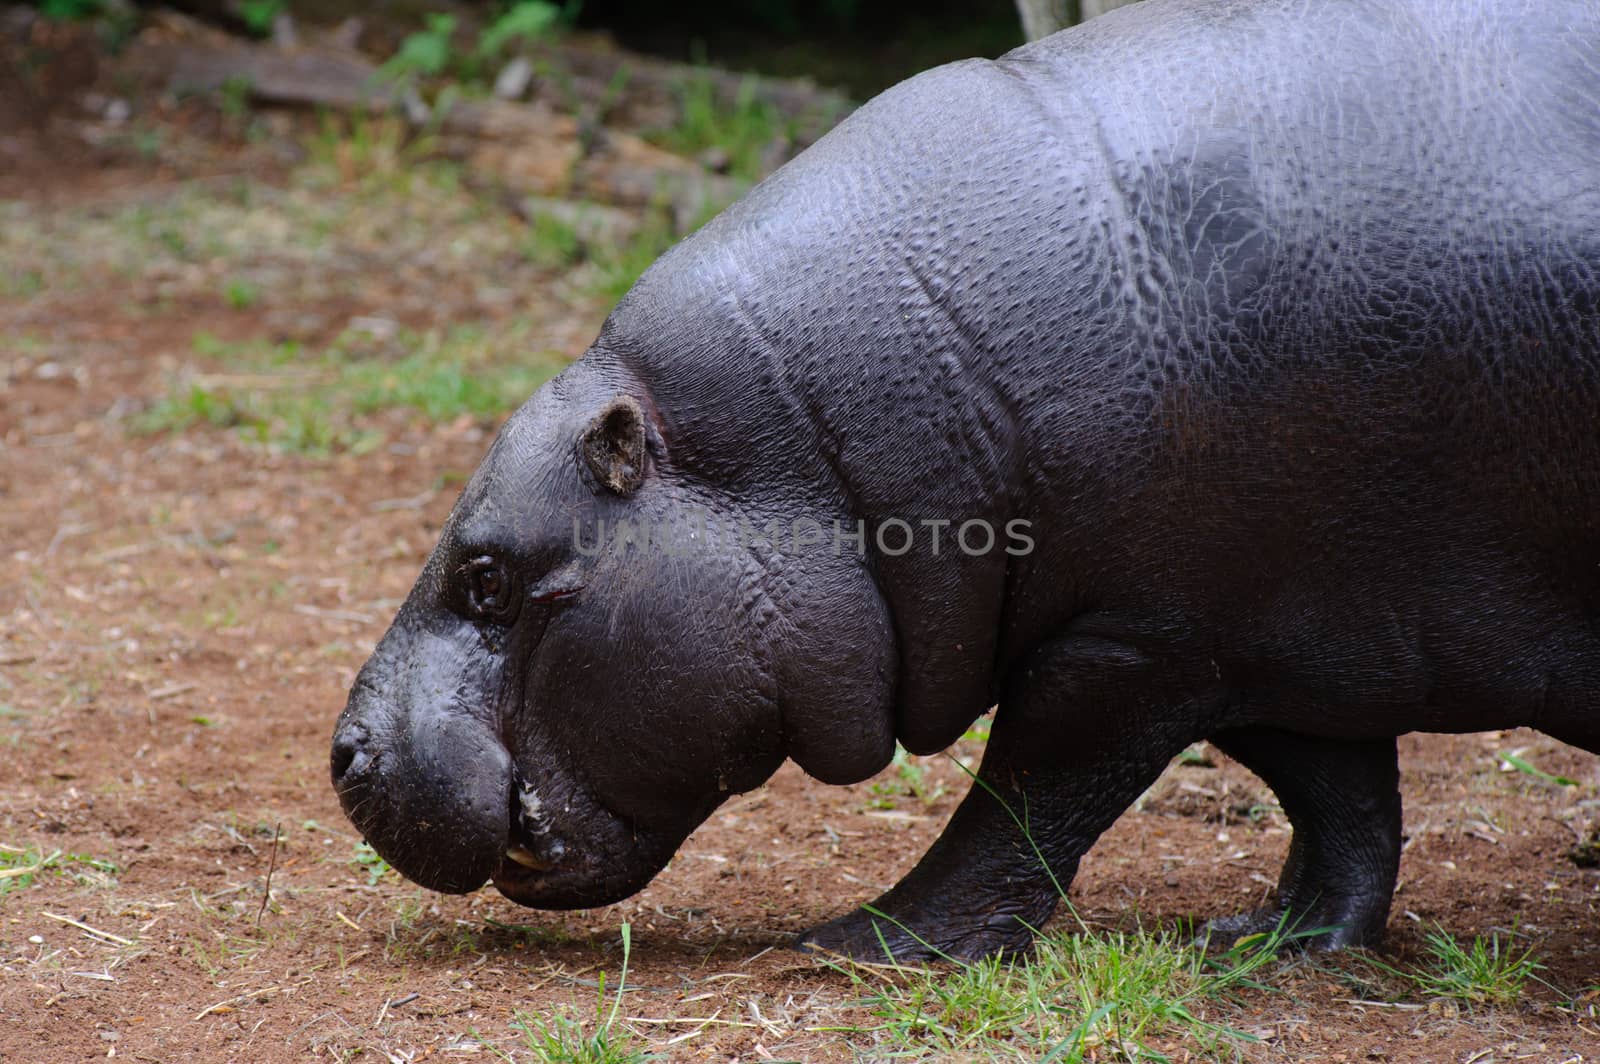 Pygmy hippo walking by kmwphotography